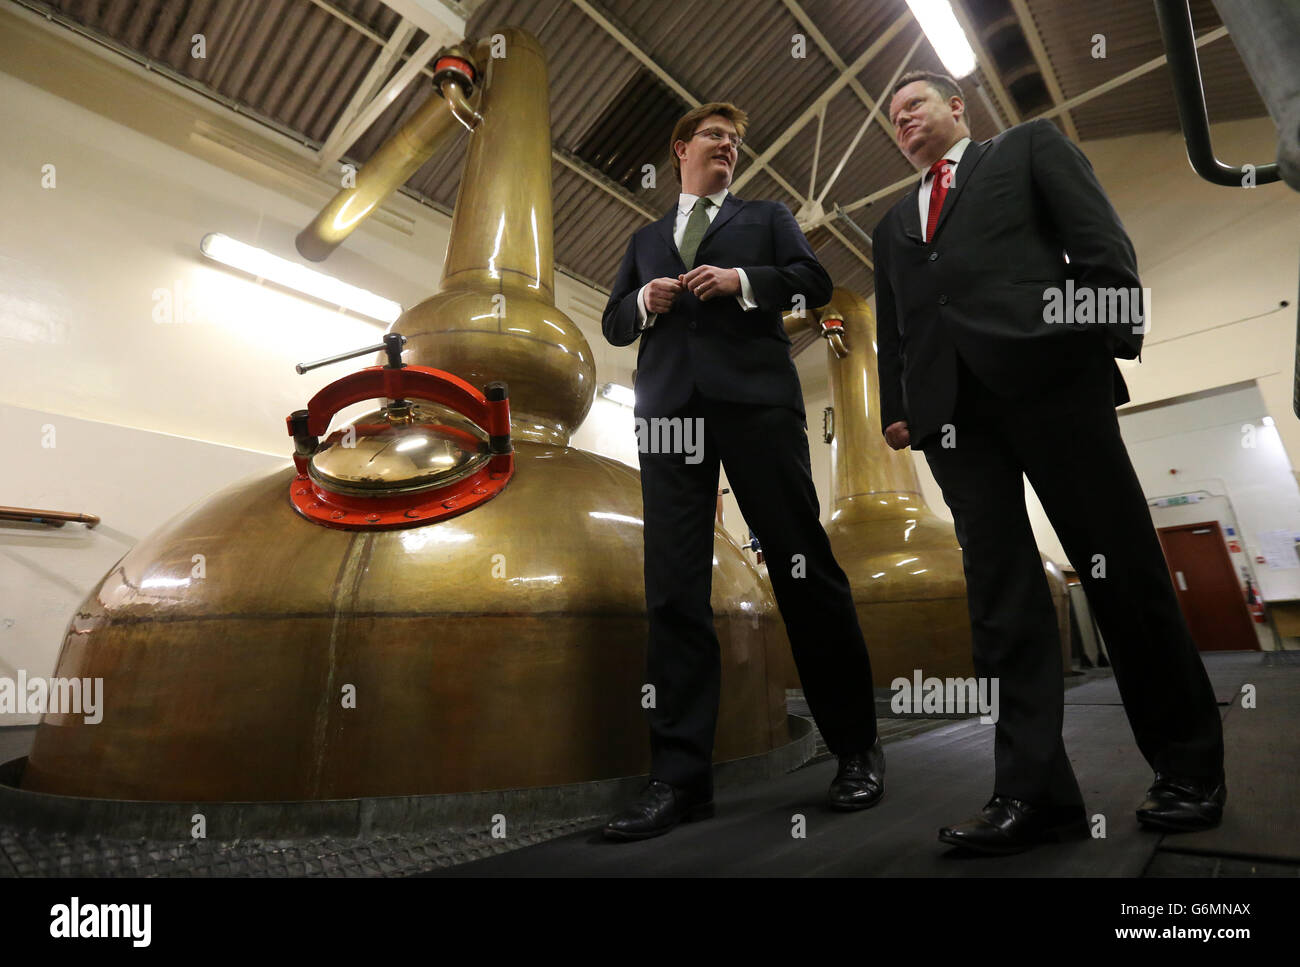 New Scotch Whisky Association Chief David Frost (right) talks to Chief Secretary to the Treasury Danny Alexander in the stills room during a visit to Benromach distillery in Forres, near Inverness, as he launches the Spirit Drinks Verification Scheme. PRESS ASSOCIATION Photo. Picture date: Thursday January 9, 2014. See PA story POLITICS Spirits. Photo credit should read: Andrew Milligan/PA Wire Stock Photo